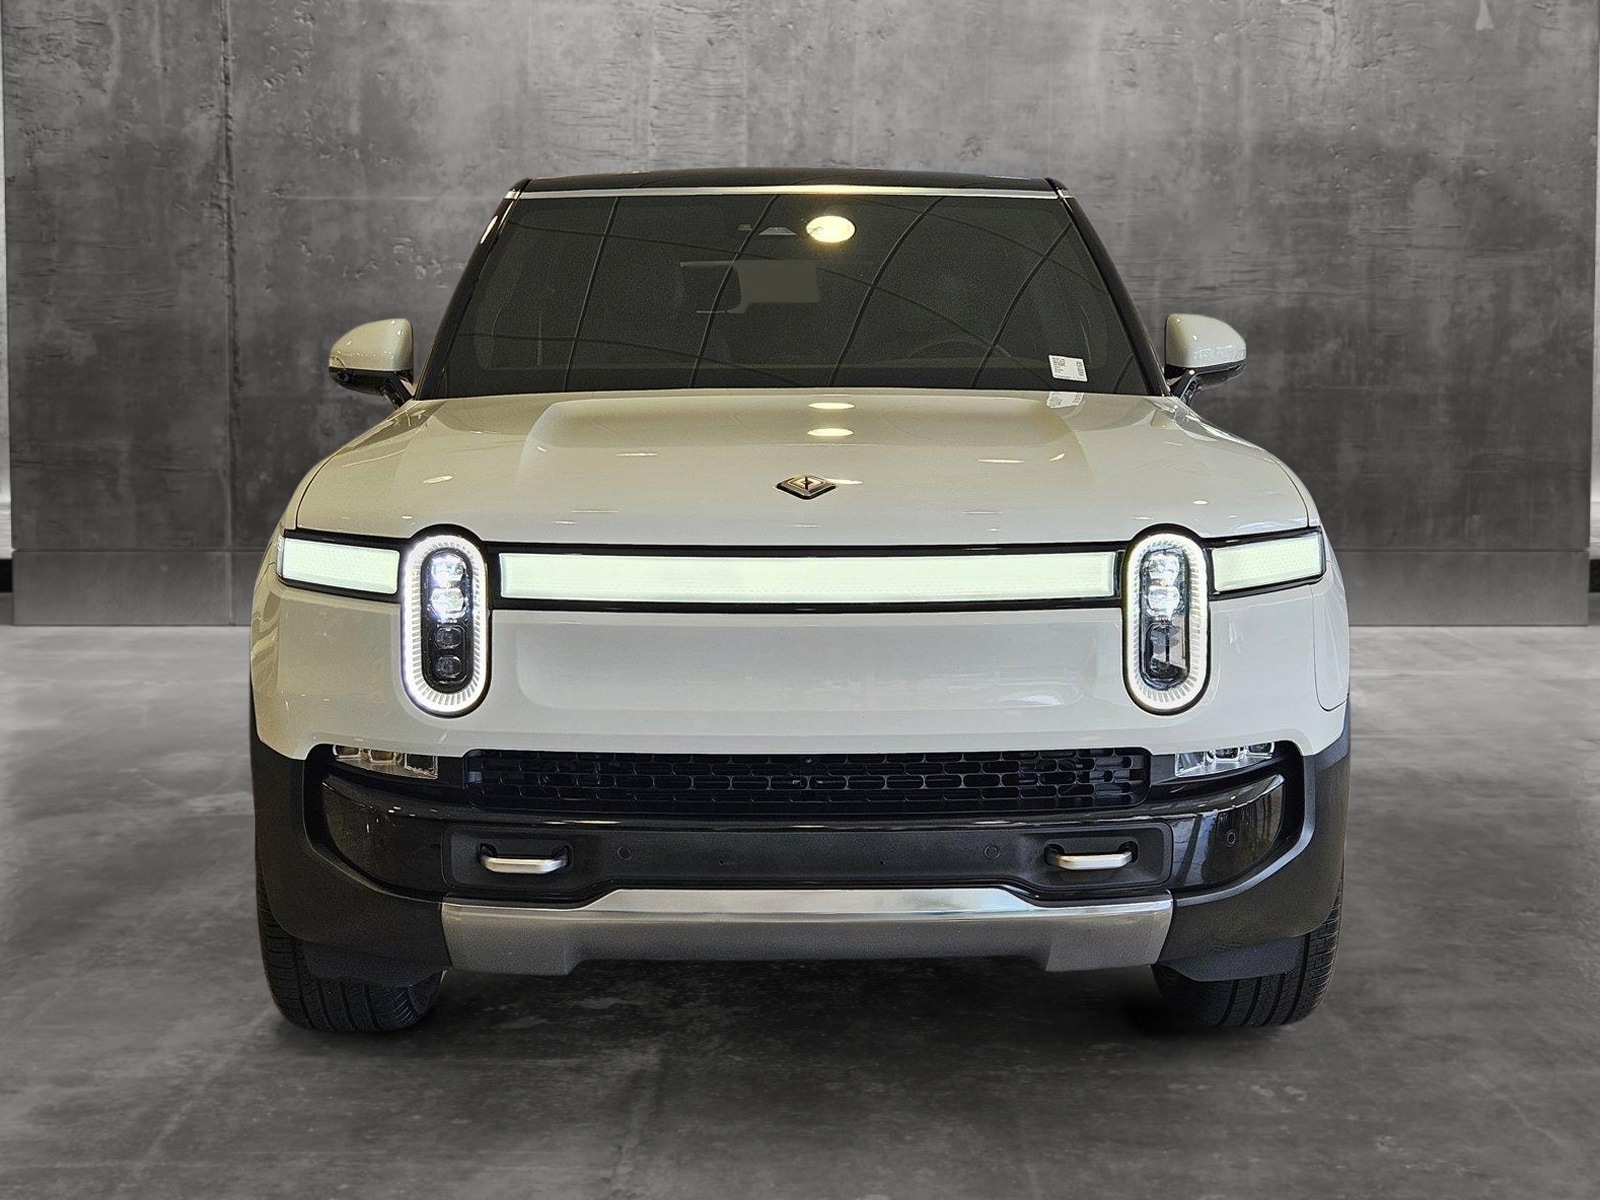 Used 2022 Rivian R1S Launch Edition with VIN 7PDSGABL8NN001630 for sale in Columbus, GA